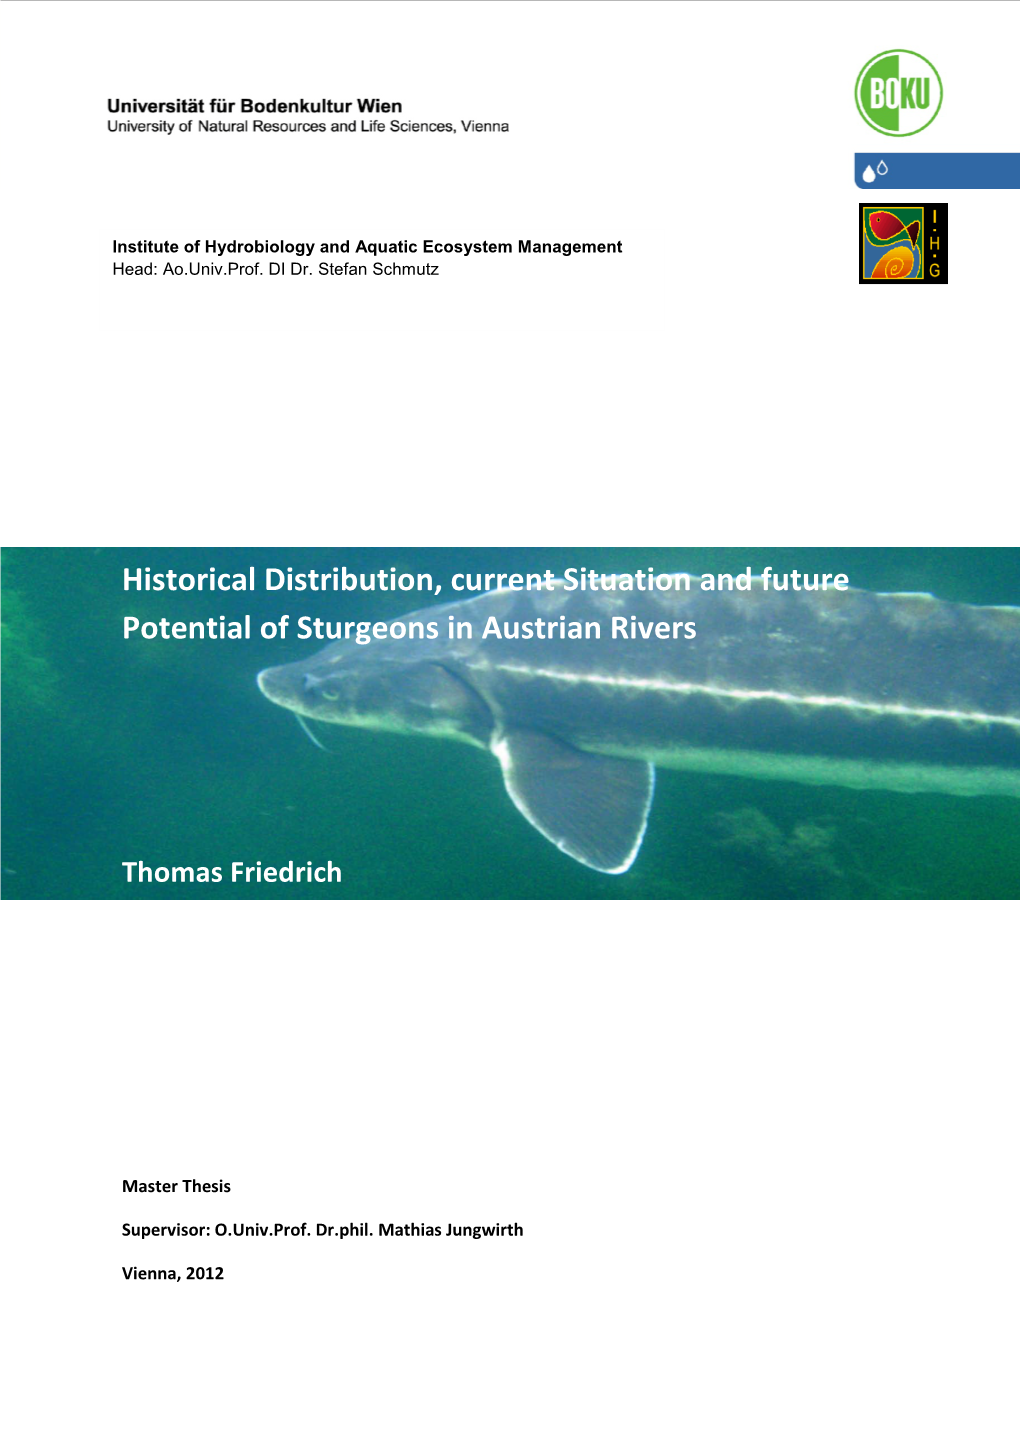 Historical Distribution, Current Situation and Future Potential of Sturgeons in Austrian Rivers